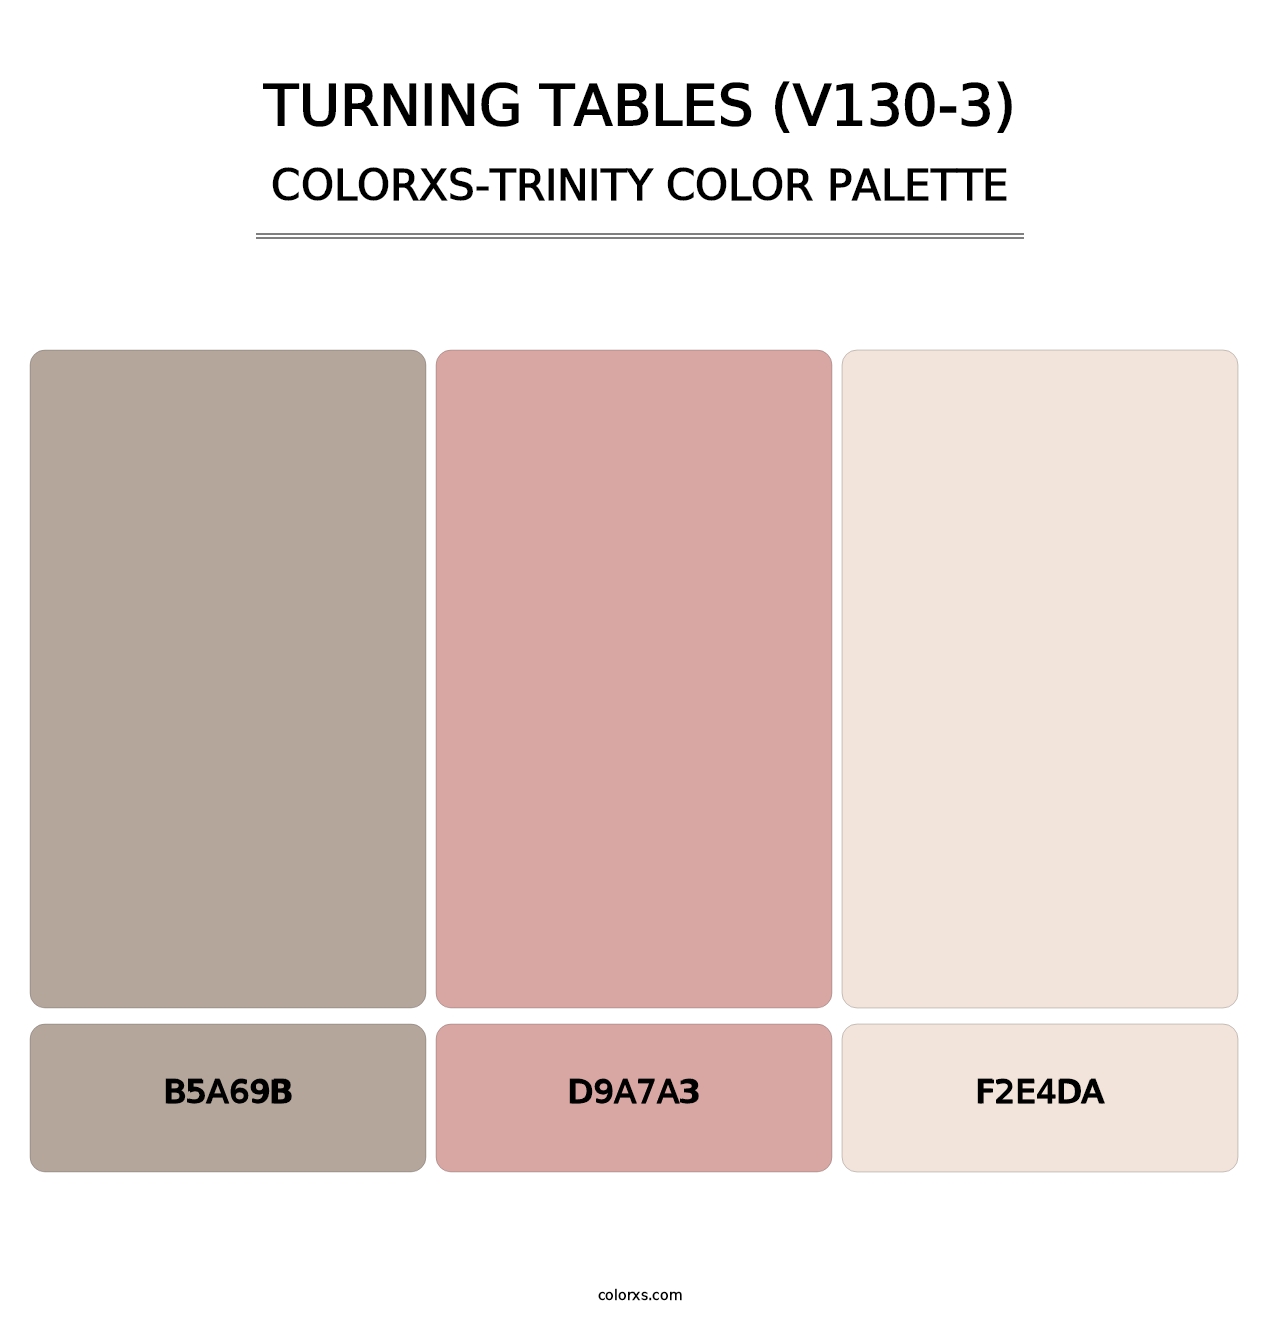 Turning Tables (V130-3) - Colorxs Trinity Palette